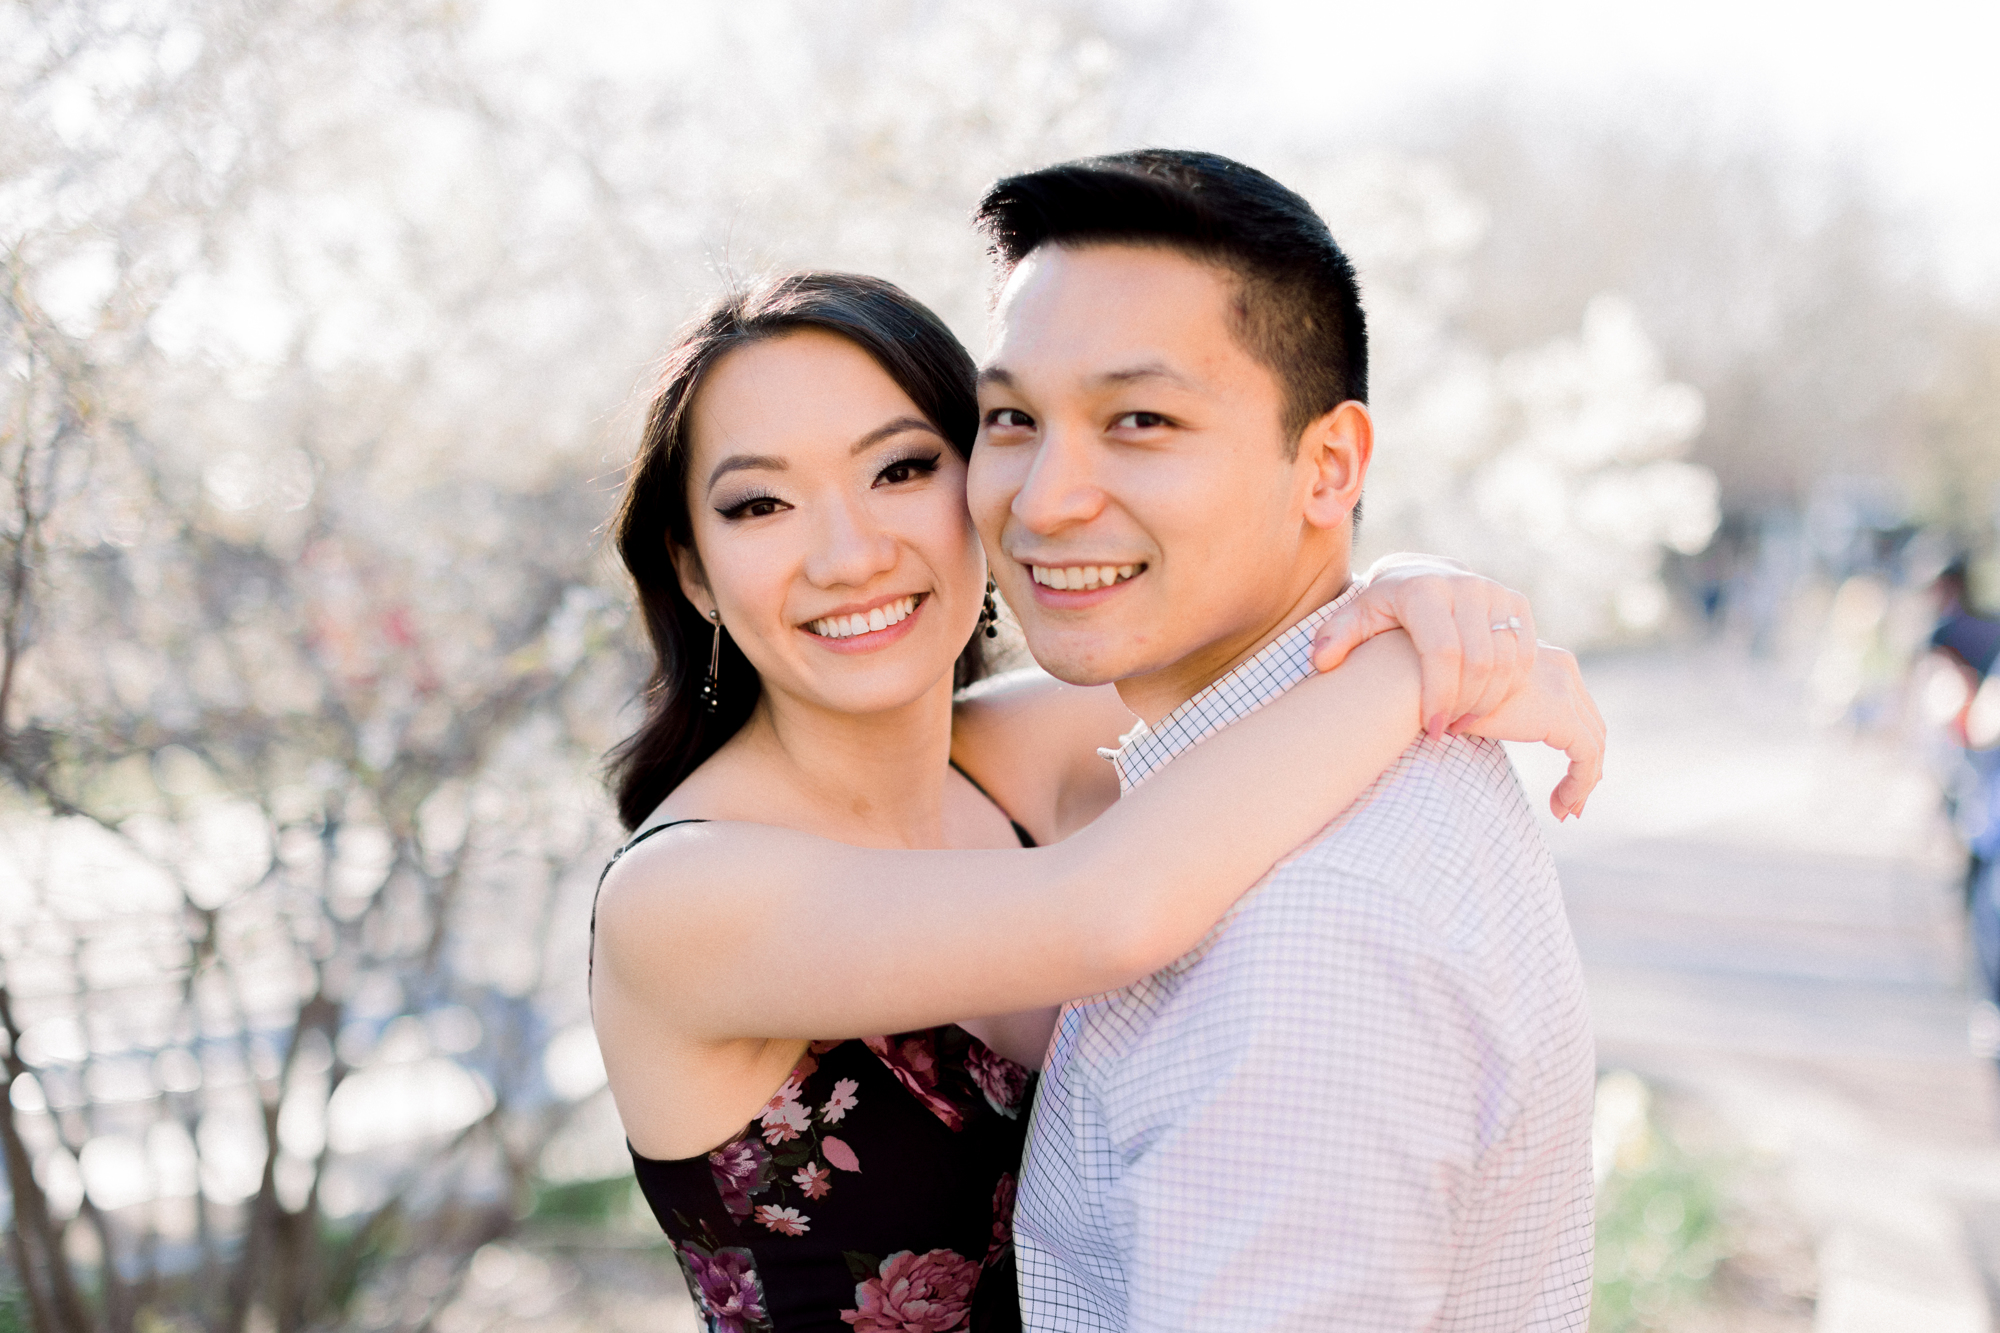 Radiant NYC Engagement Photography with Spring Blossoms